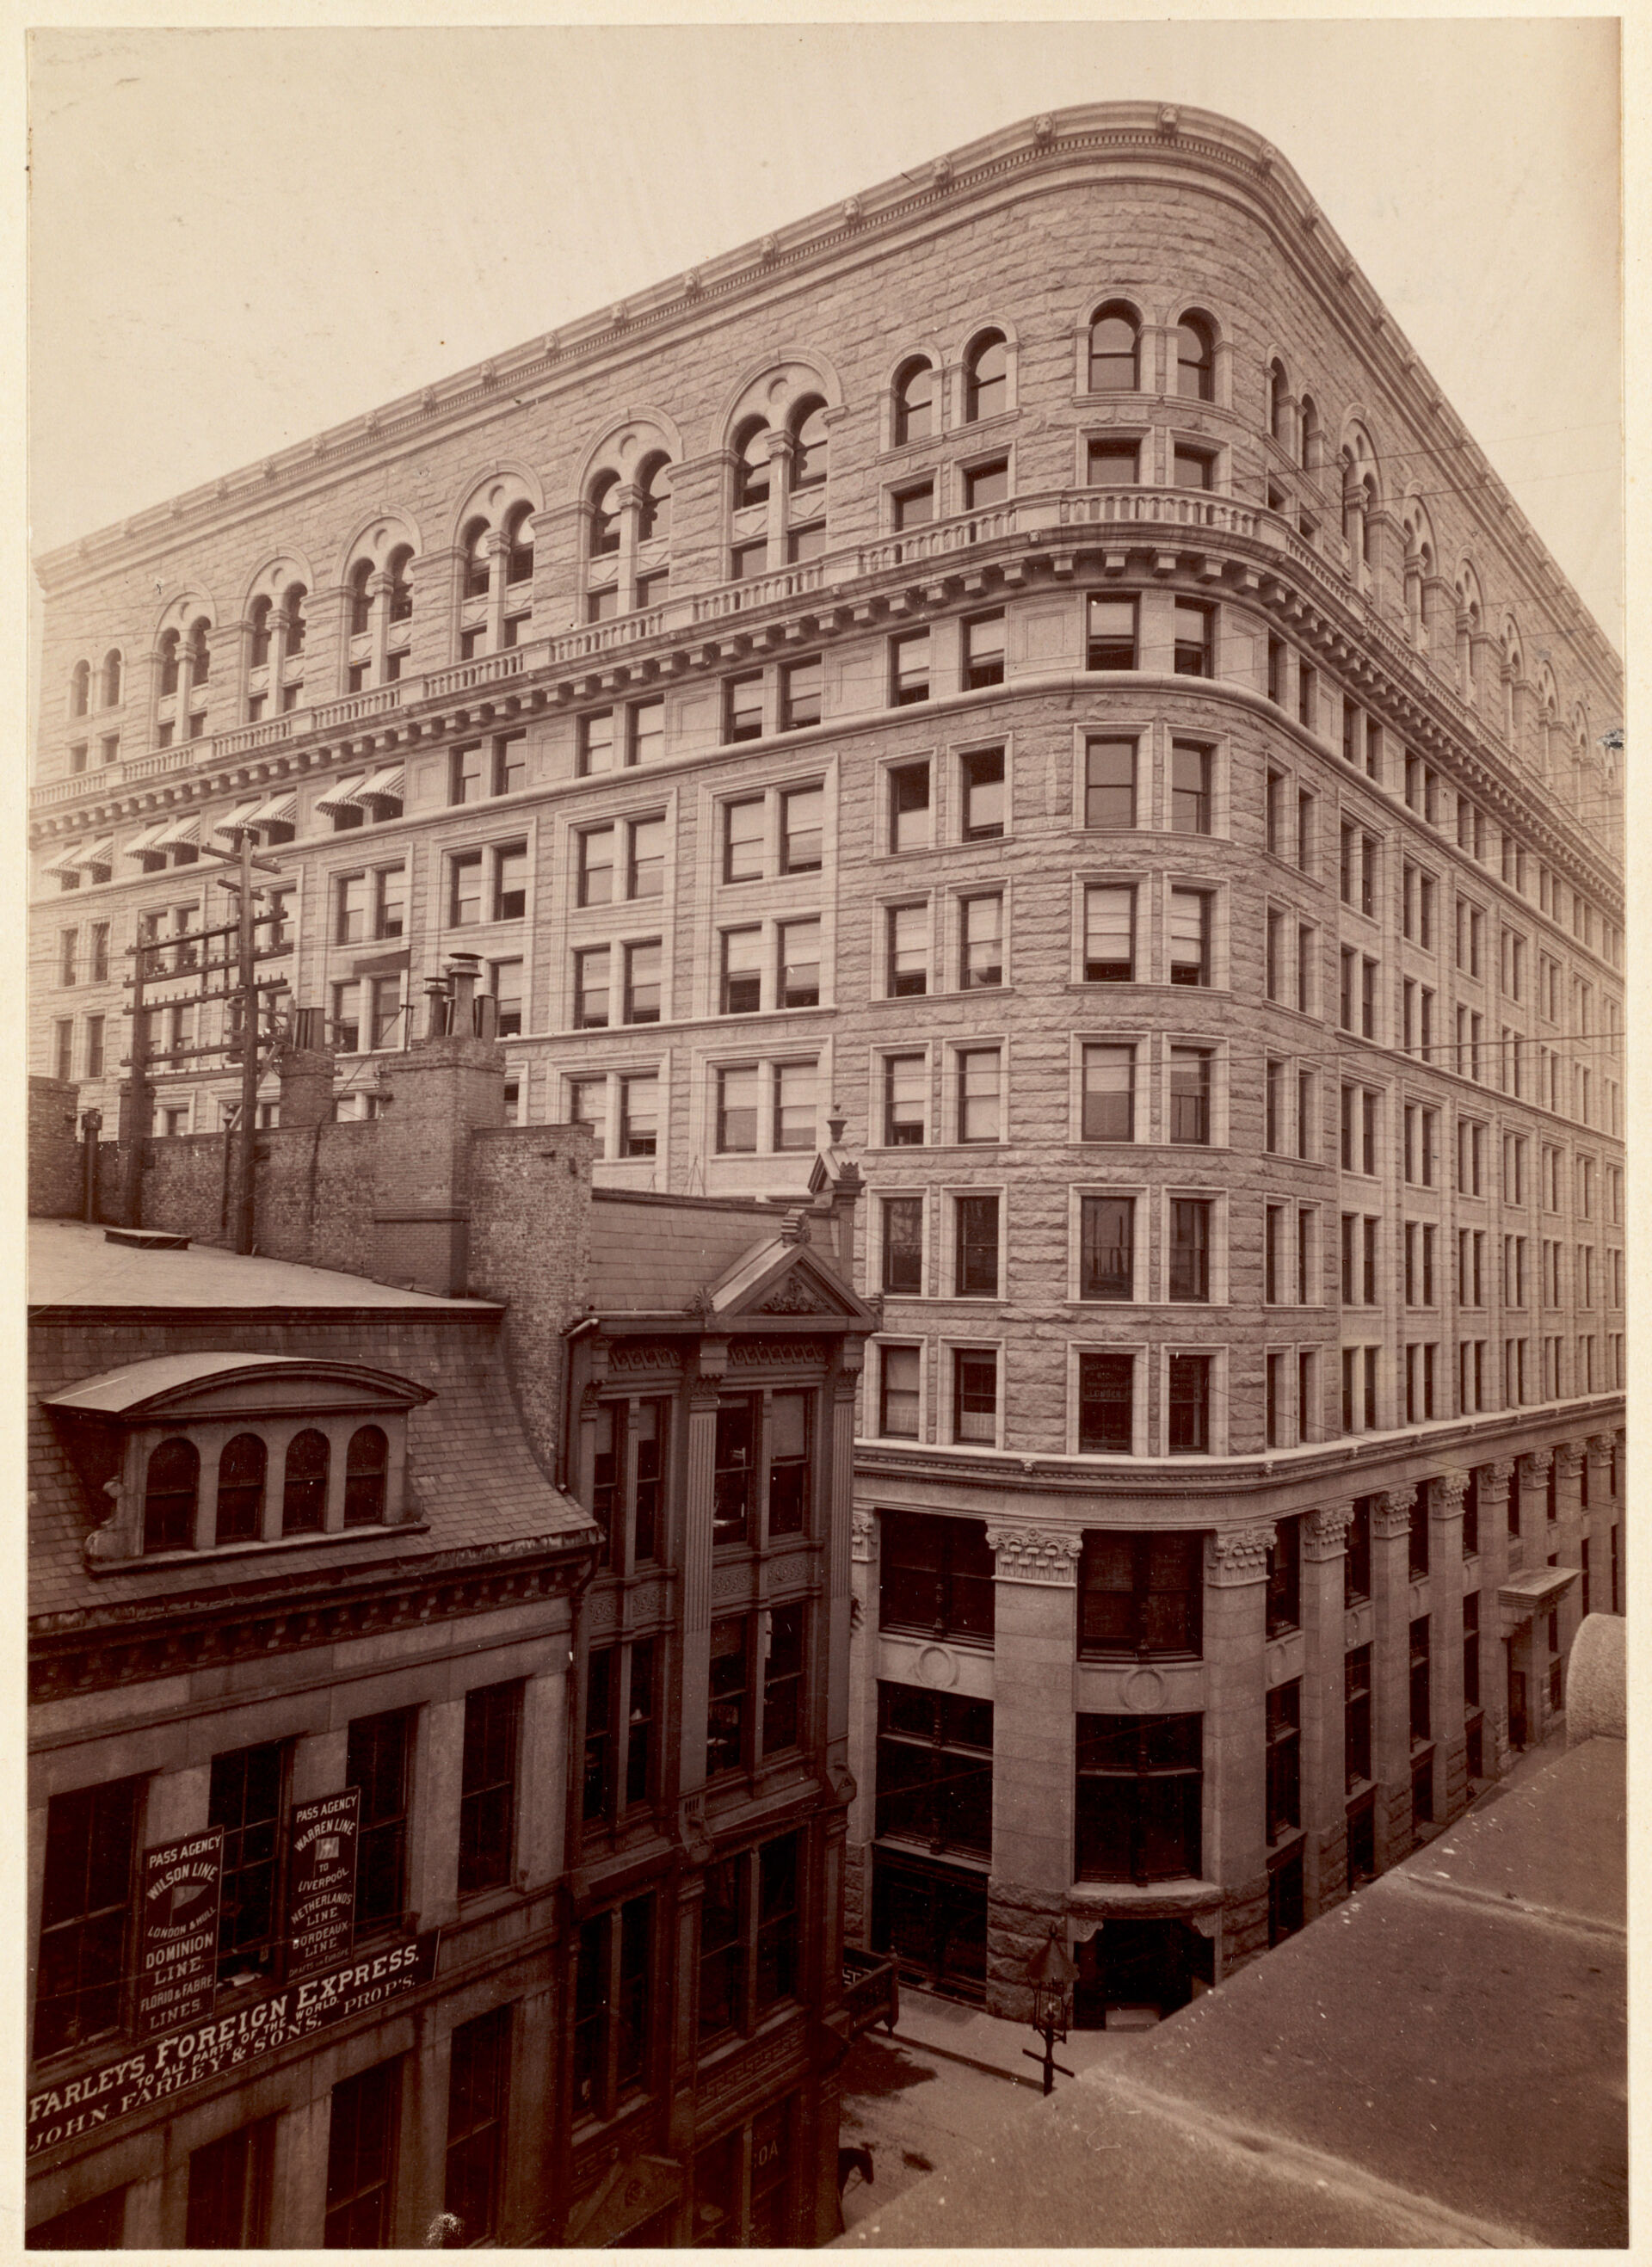 A photograph of the Boston Exchange building taken sometime between 1891 and 1915